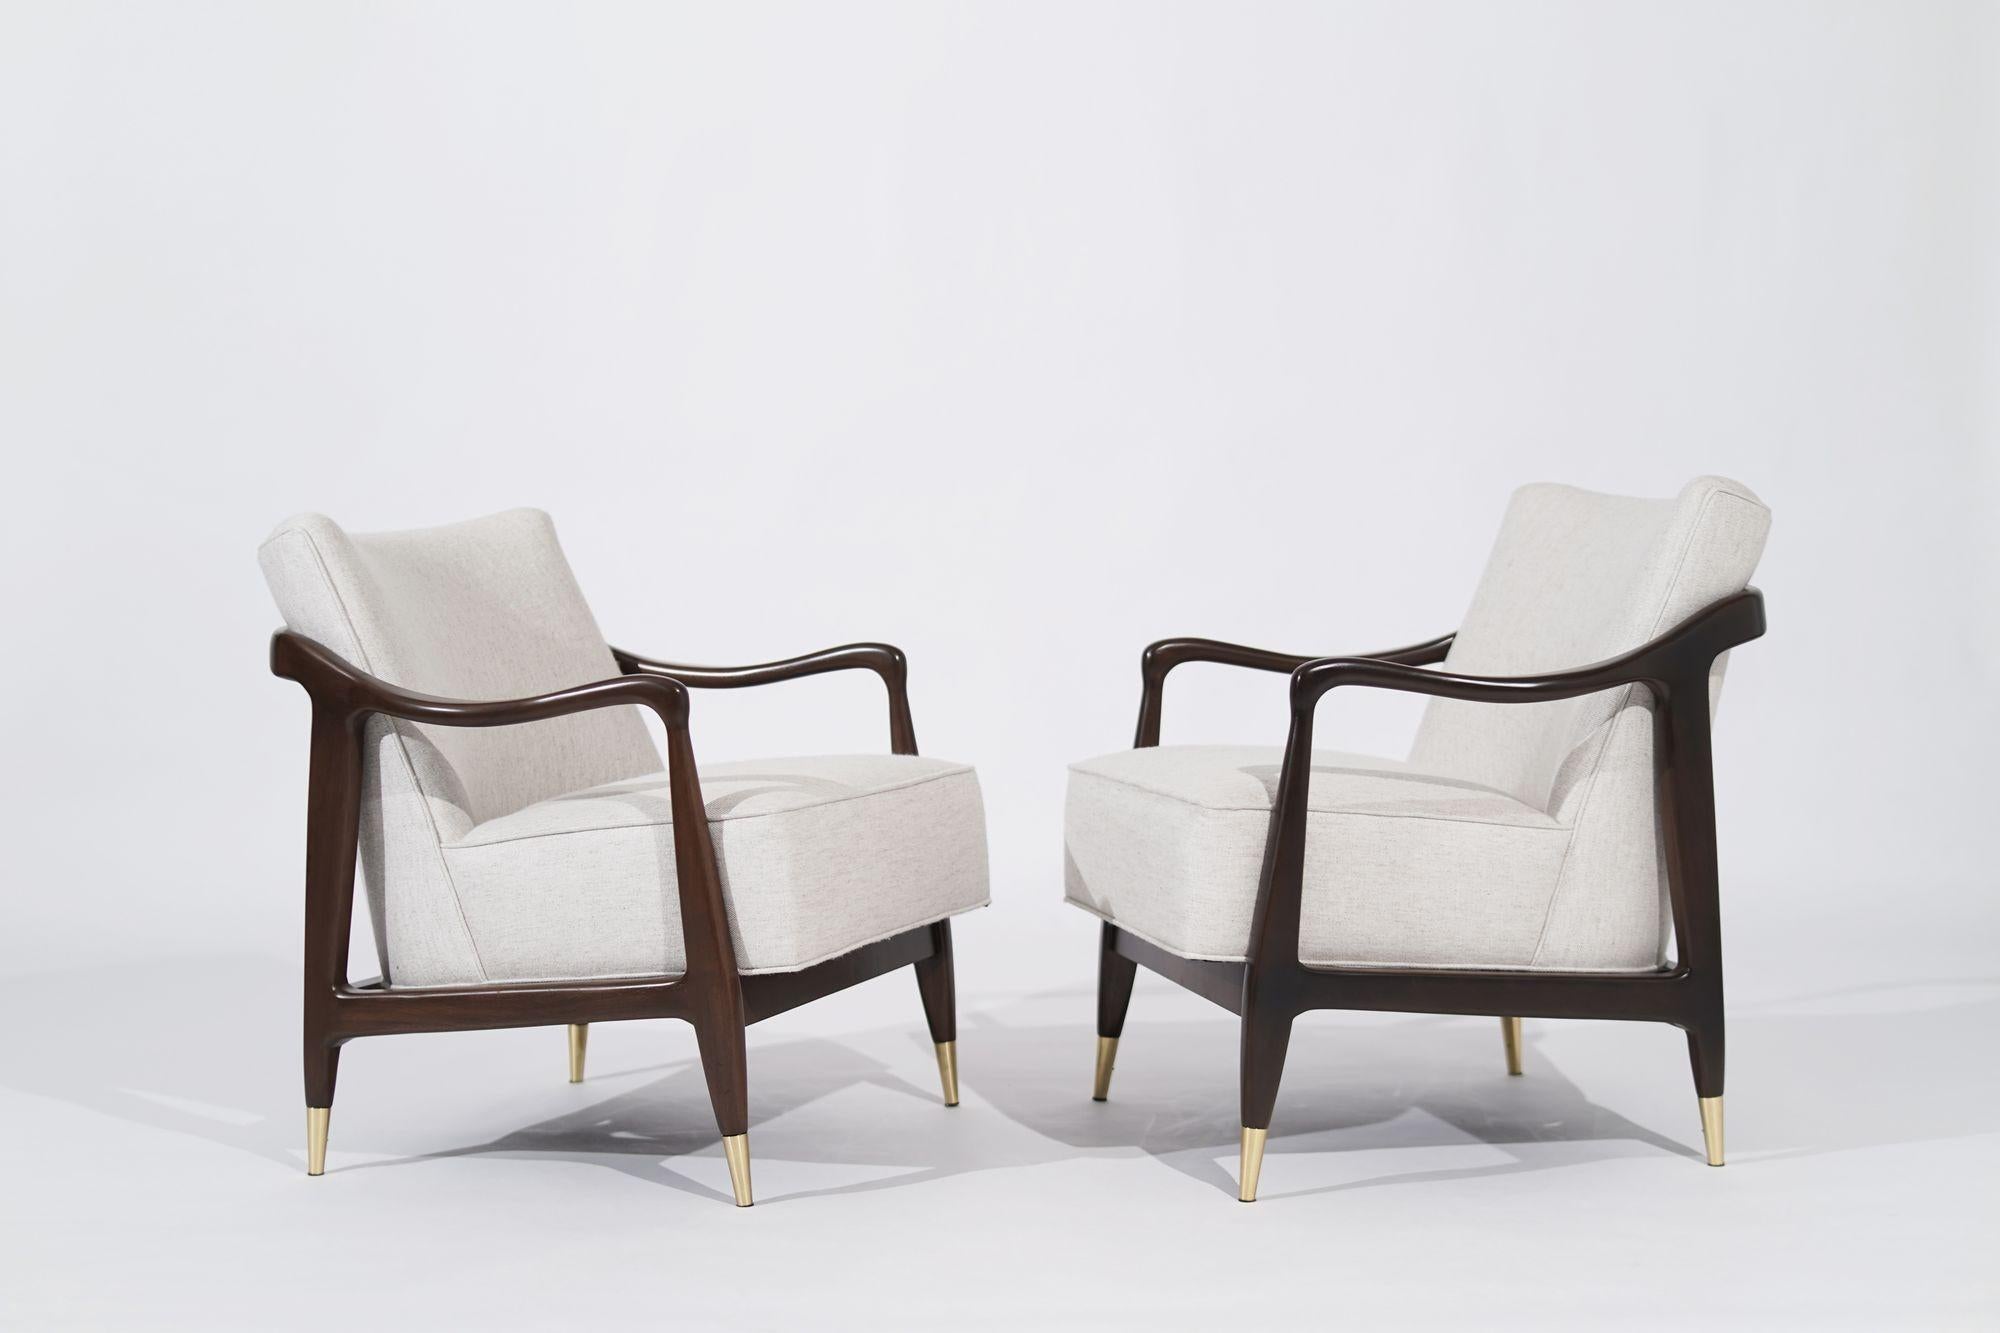 20th Century Set of Sculptural Walnut Lounge Chairs in the Style of Gio Ponti, C. 1950s